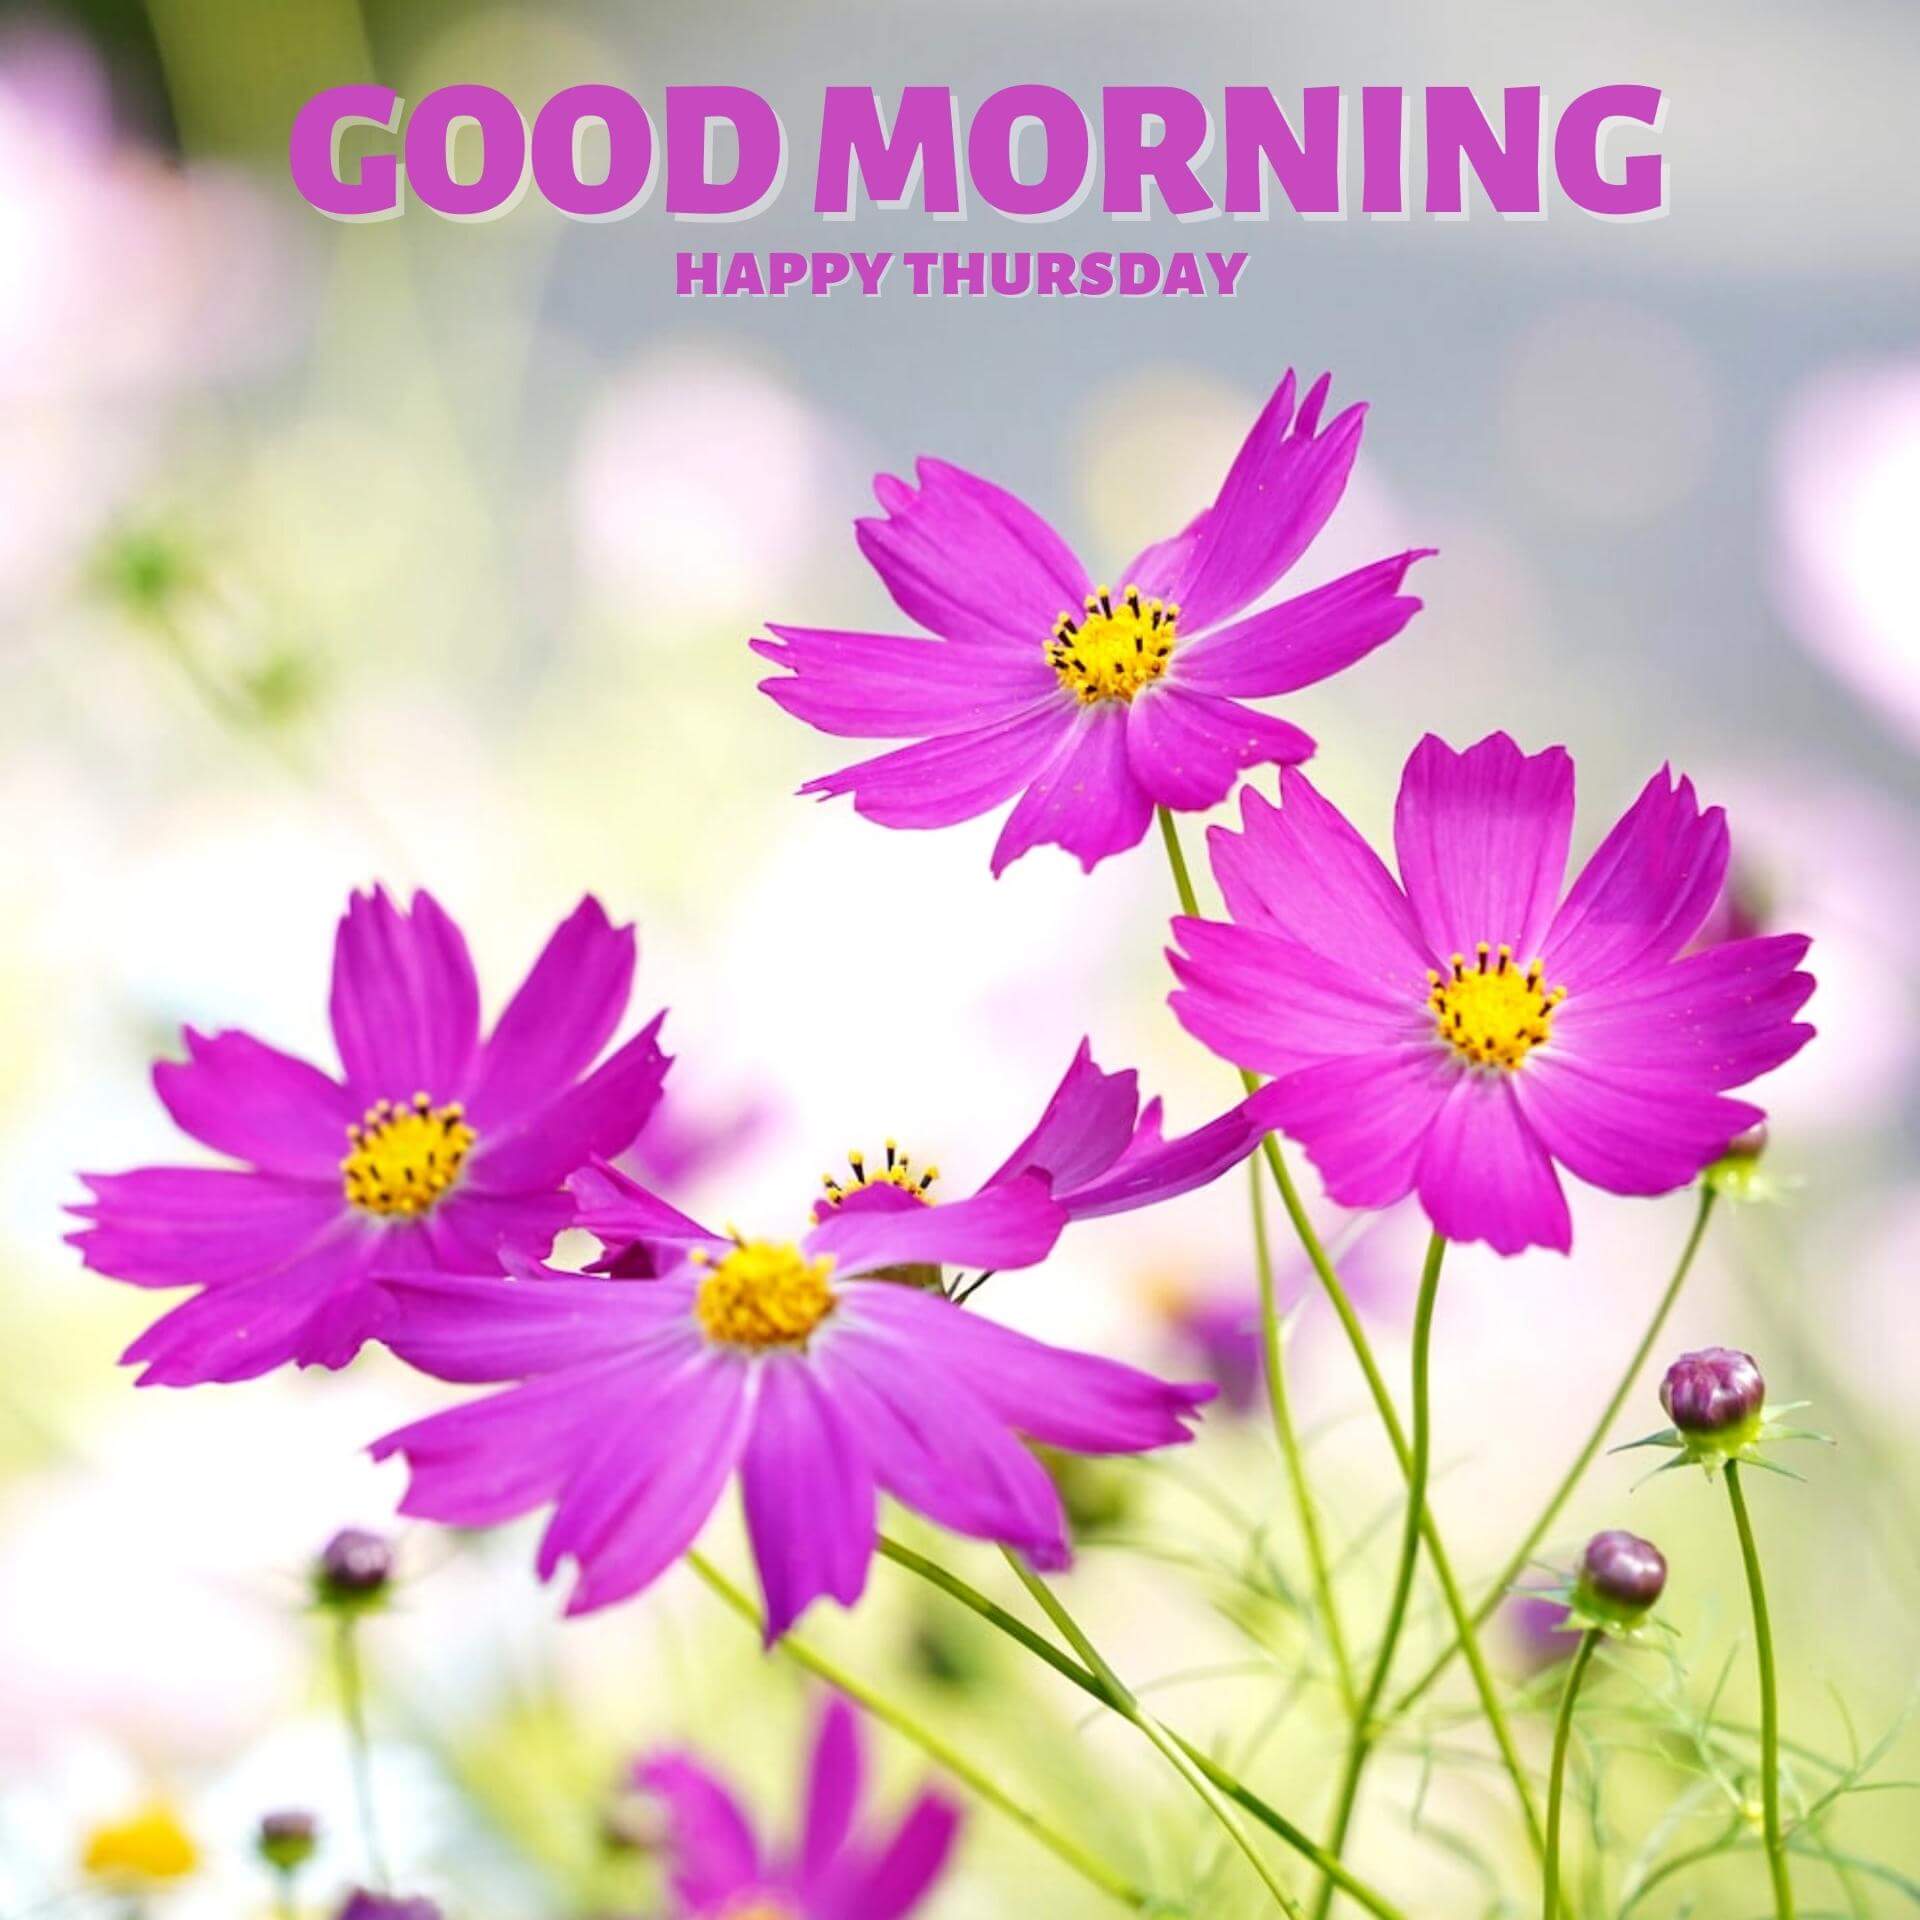 Good Morning Thursday Images Pics Download